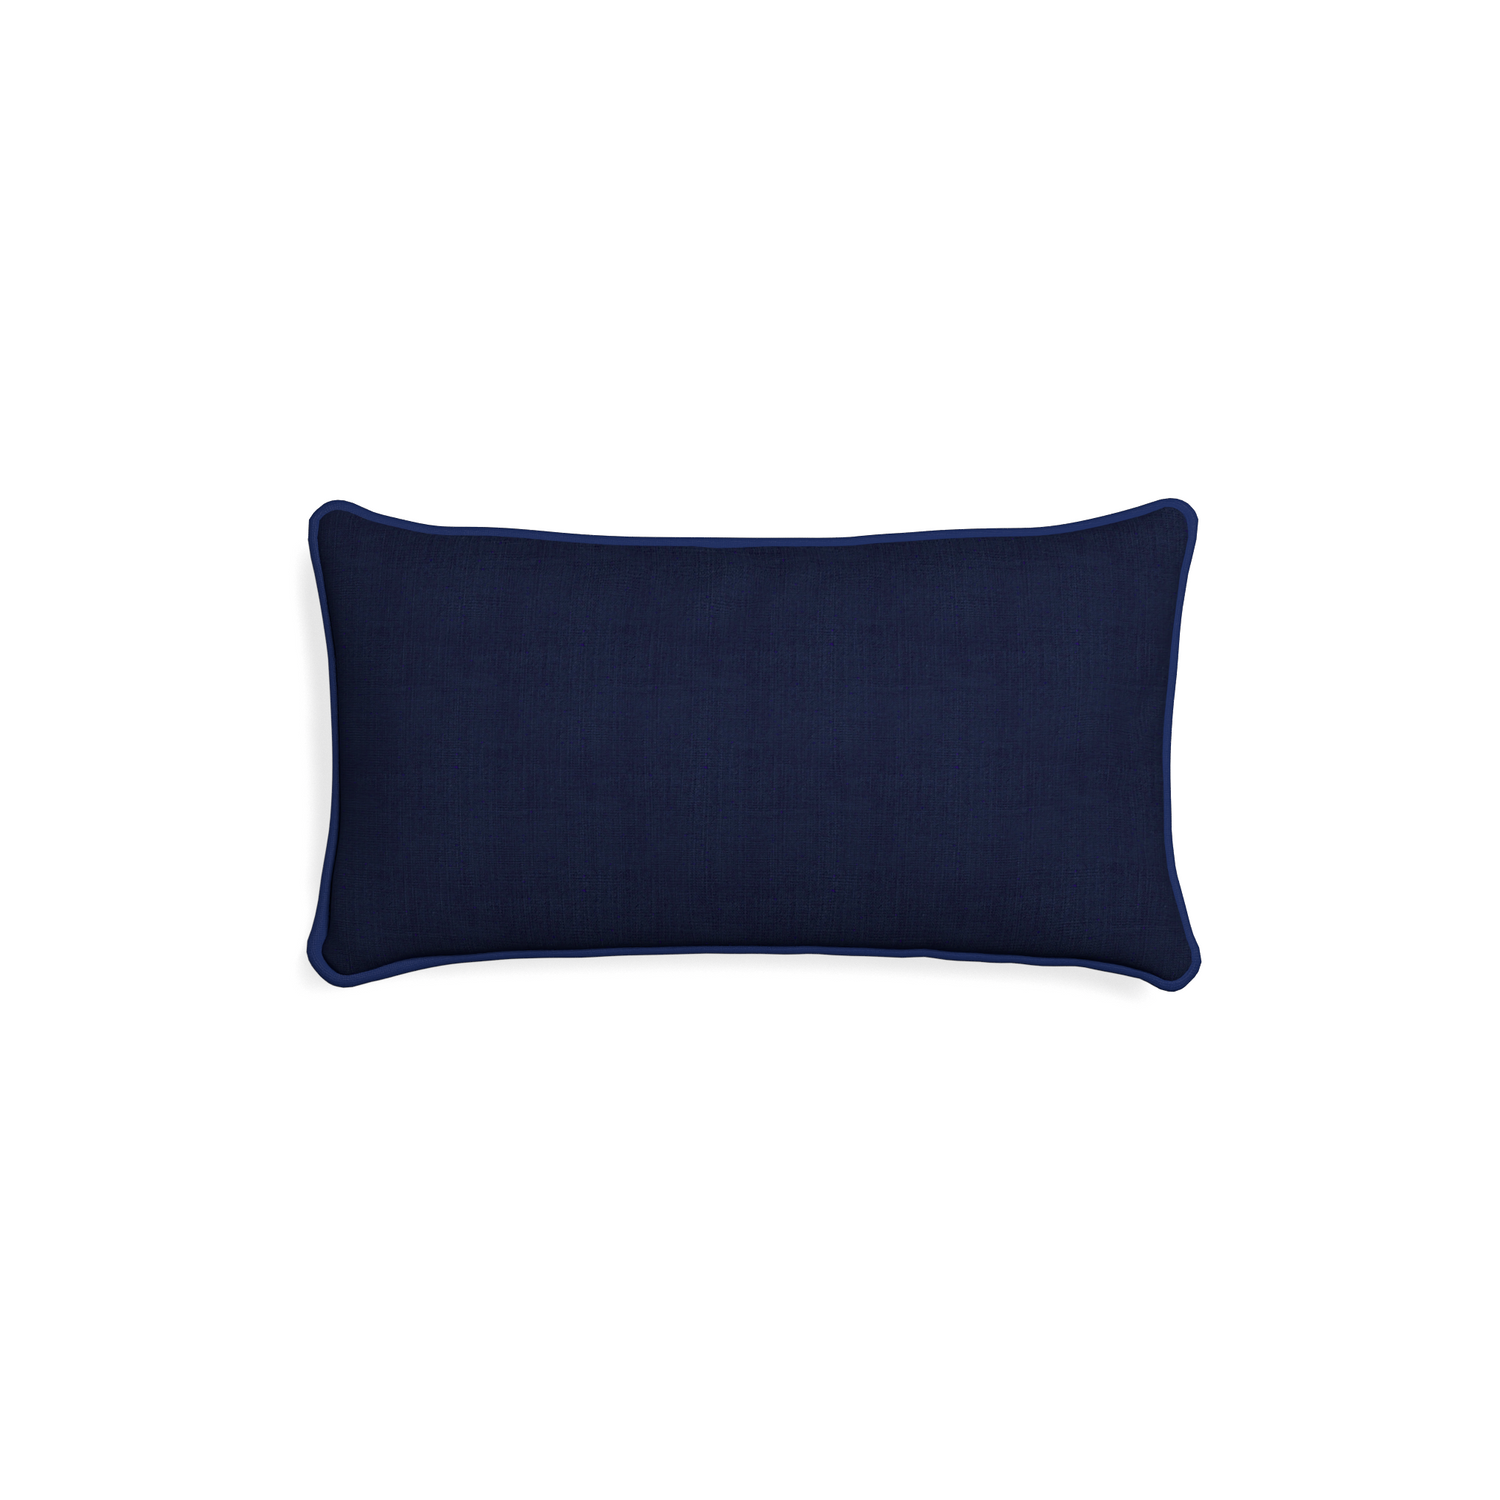 Petite-lumbar midnight custom navy bluepillow with midnight piping on white background